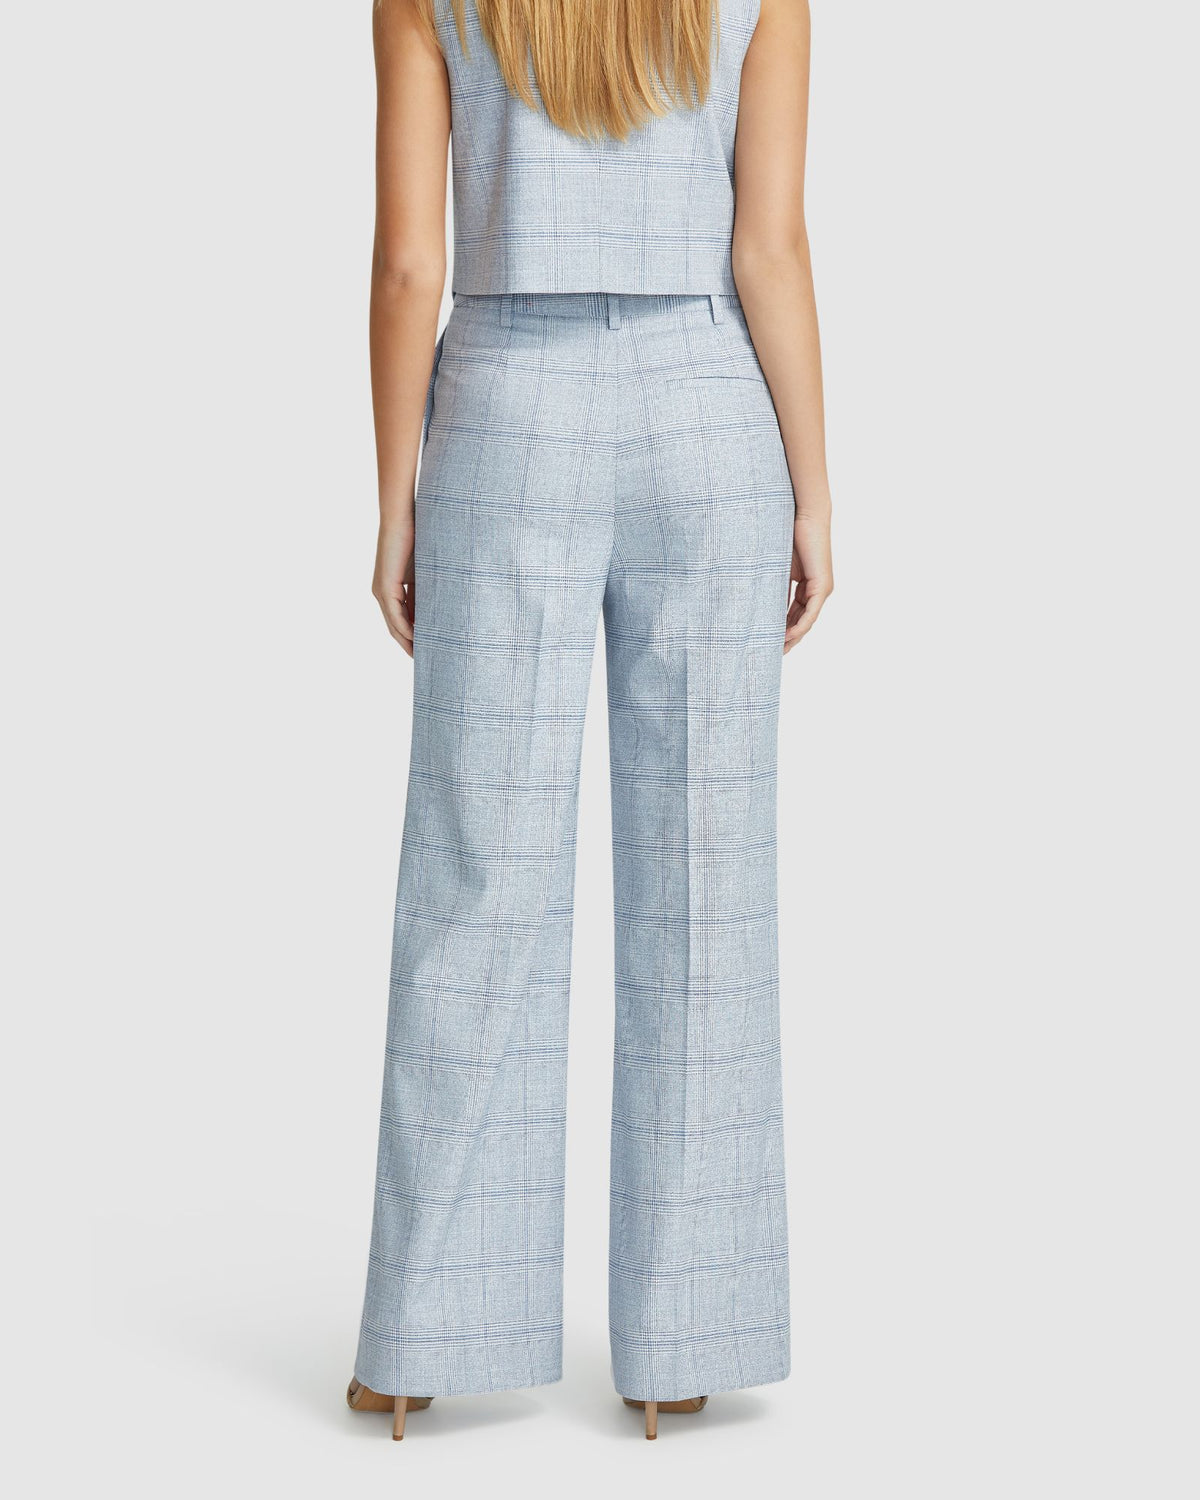 LYDIA ECO CHECKED SUIT PANTS WOMENS PANTS